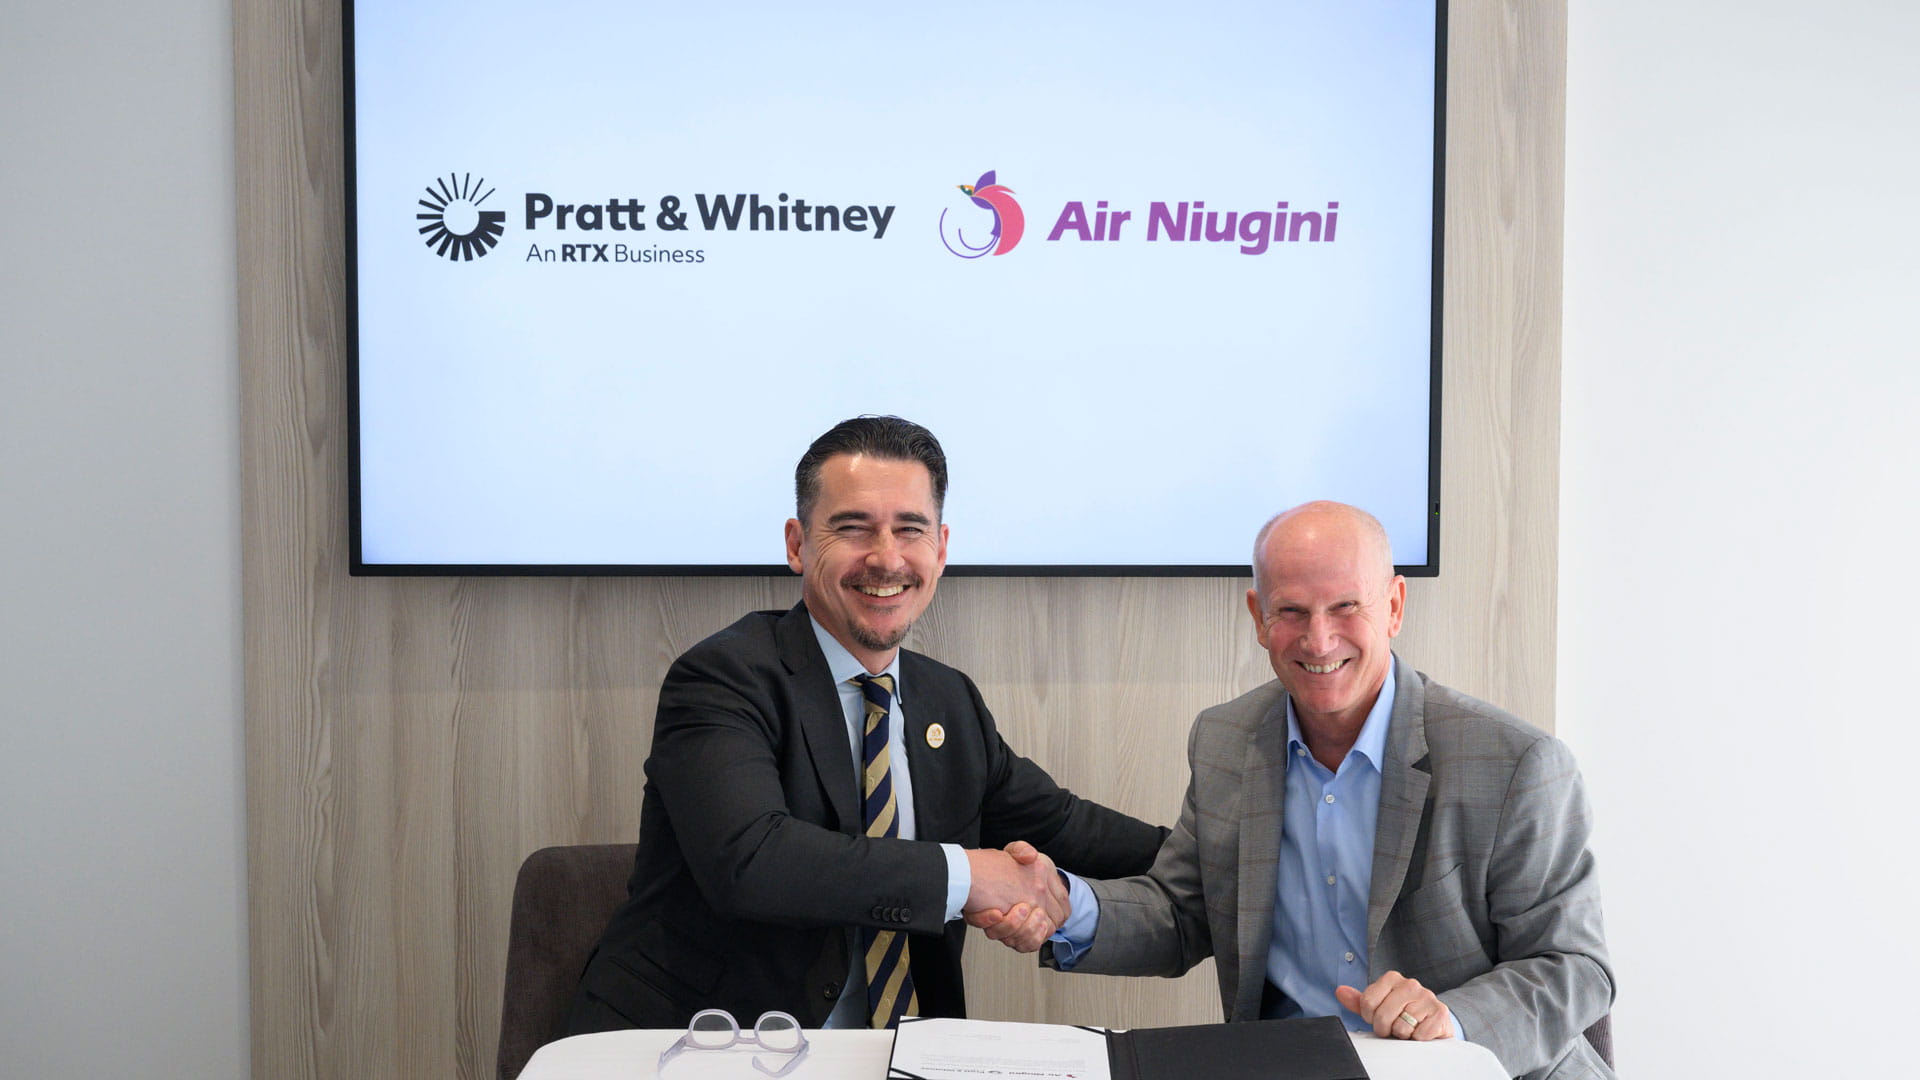 From L to R: Gary Seddon, chief executive officer of Air Niugini, and Rick Deurloo, president of Commercial Engines for Pratt & Whitney, finalize engine and aftermarket agreements for GTF engines to power 11 Airbus A220 aircraft for Air Niugini.   